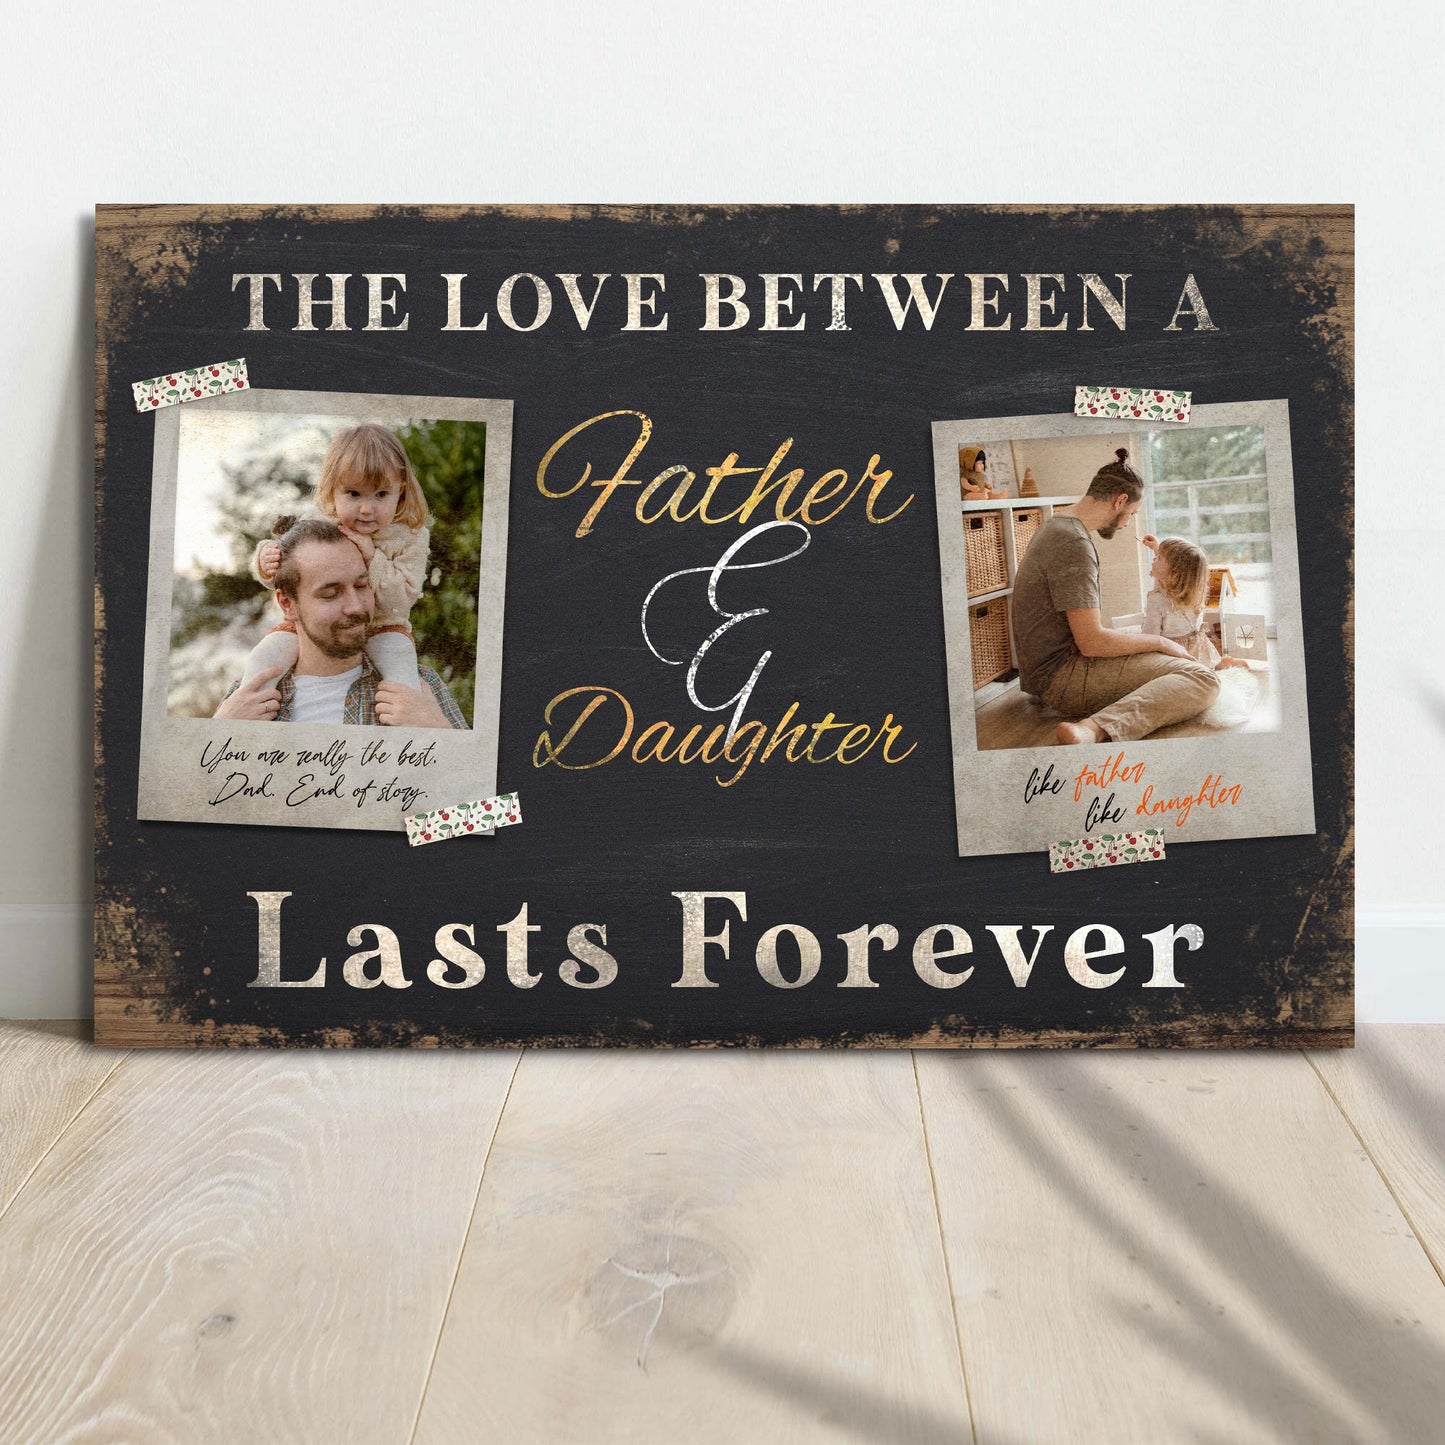 The Love Between A Father and Daughter Sign - Image by Tailored Canvases